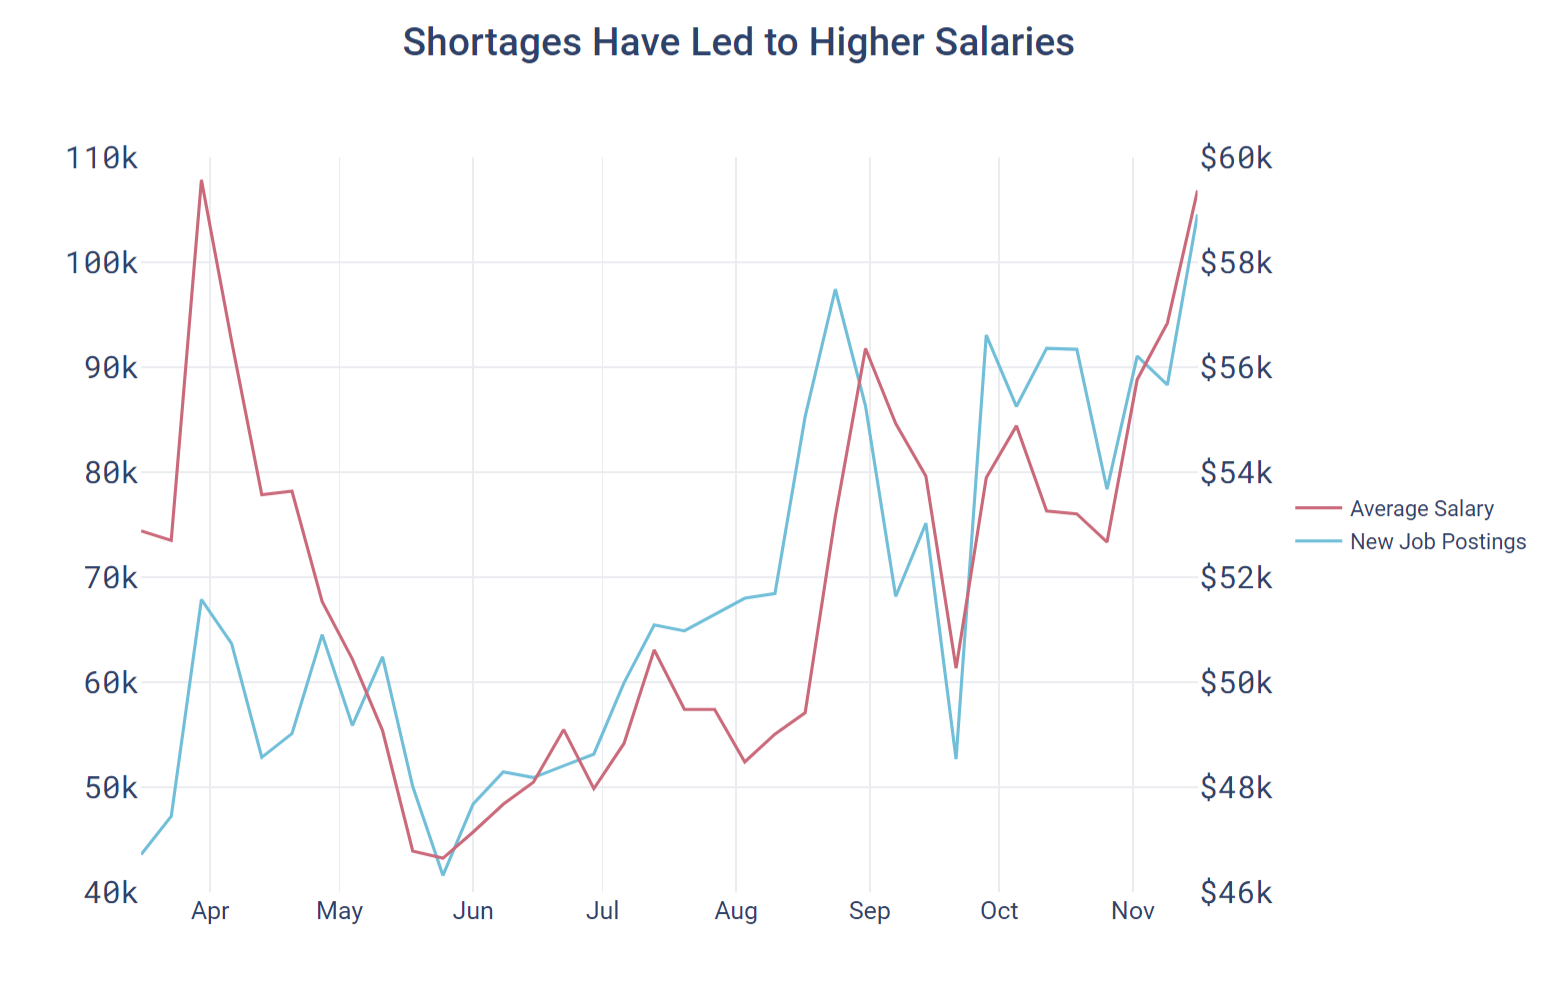 Shortages Have Led to Higher Salaries